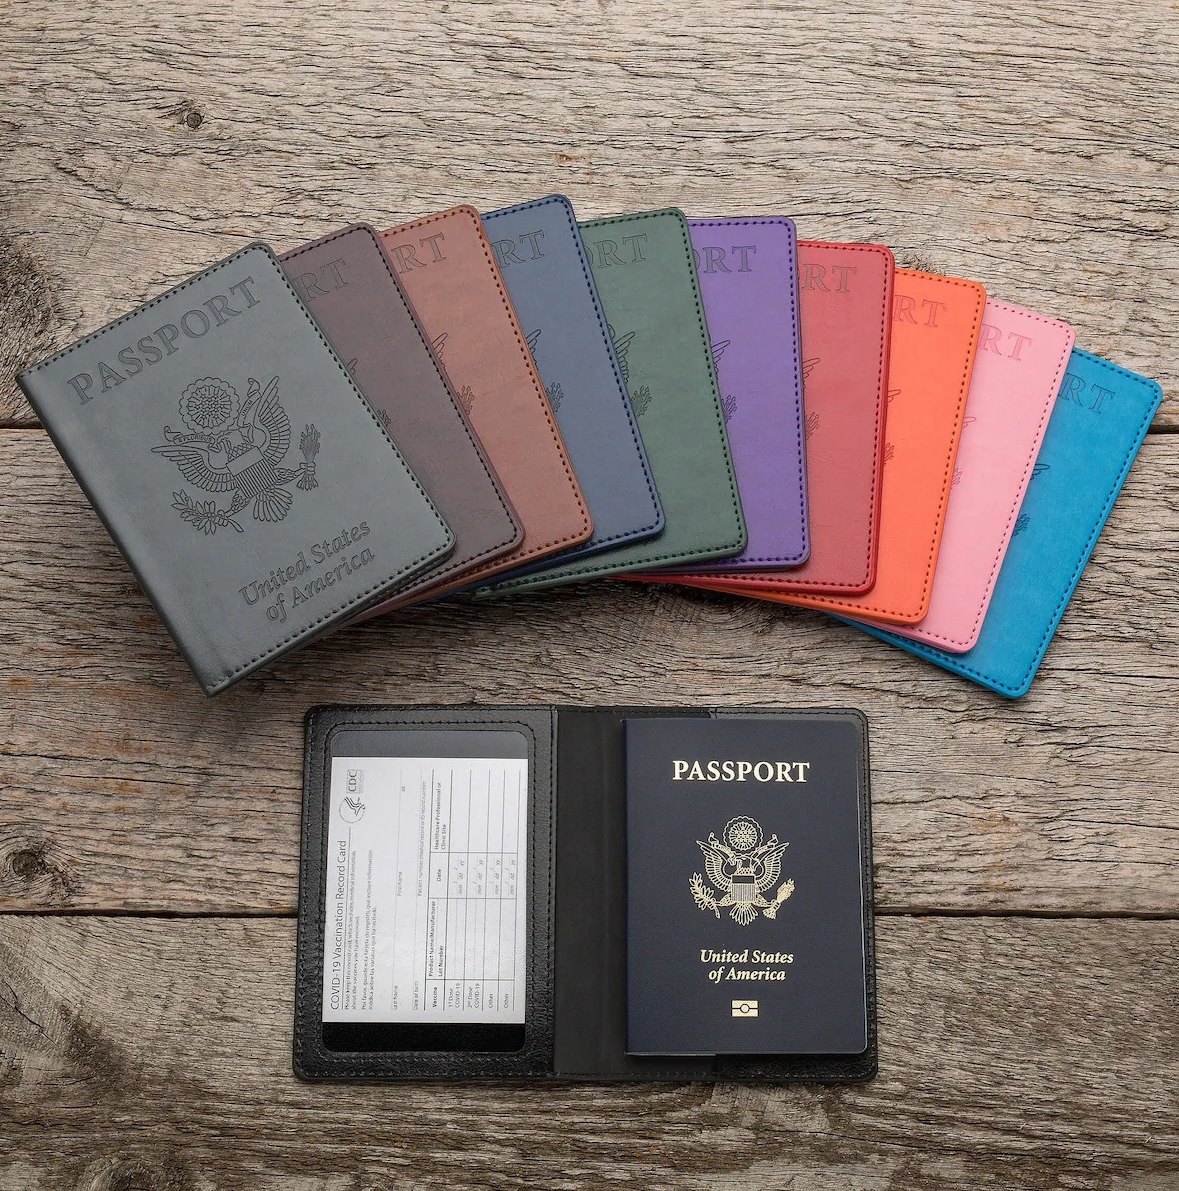 a vaccination card and passport in the black holder beneath fanned out holders in assorted colors 